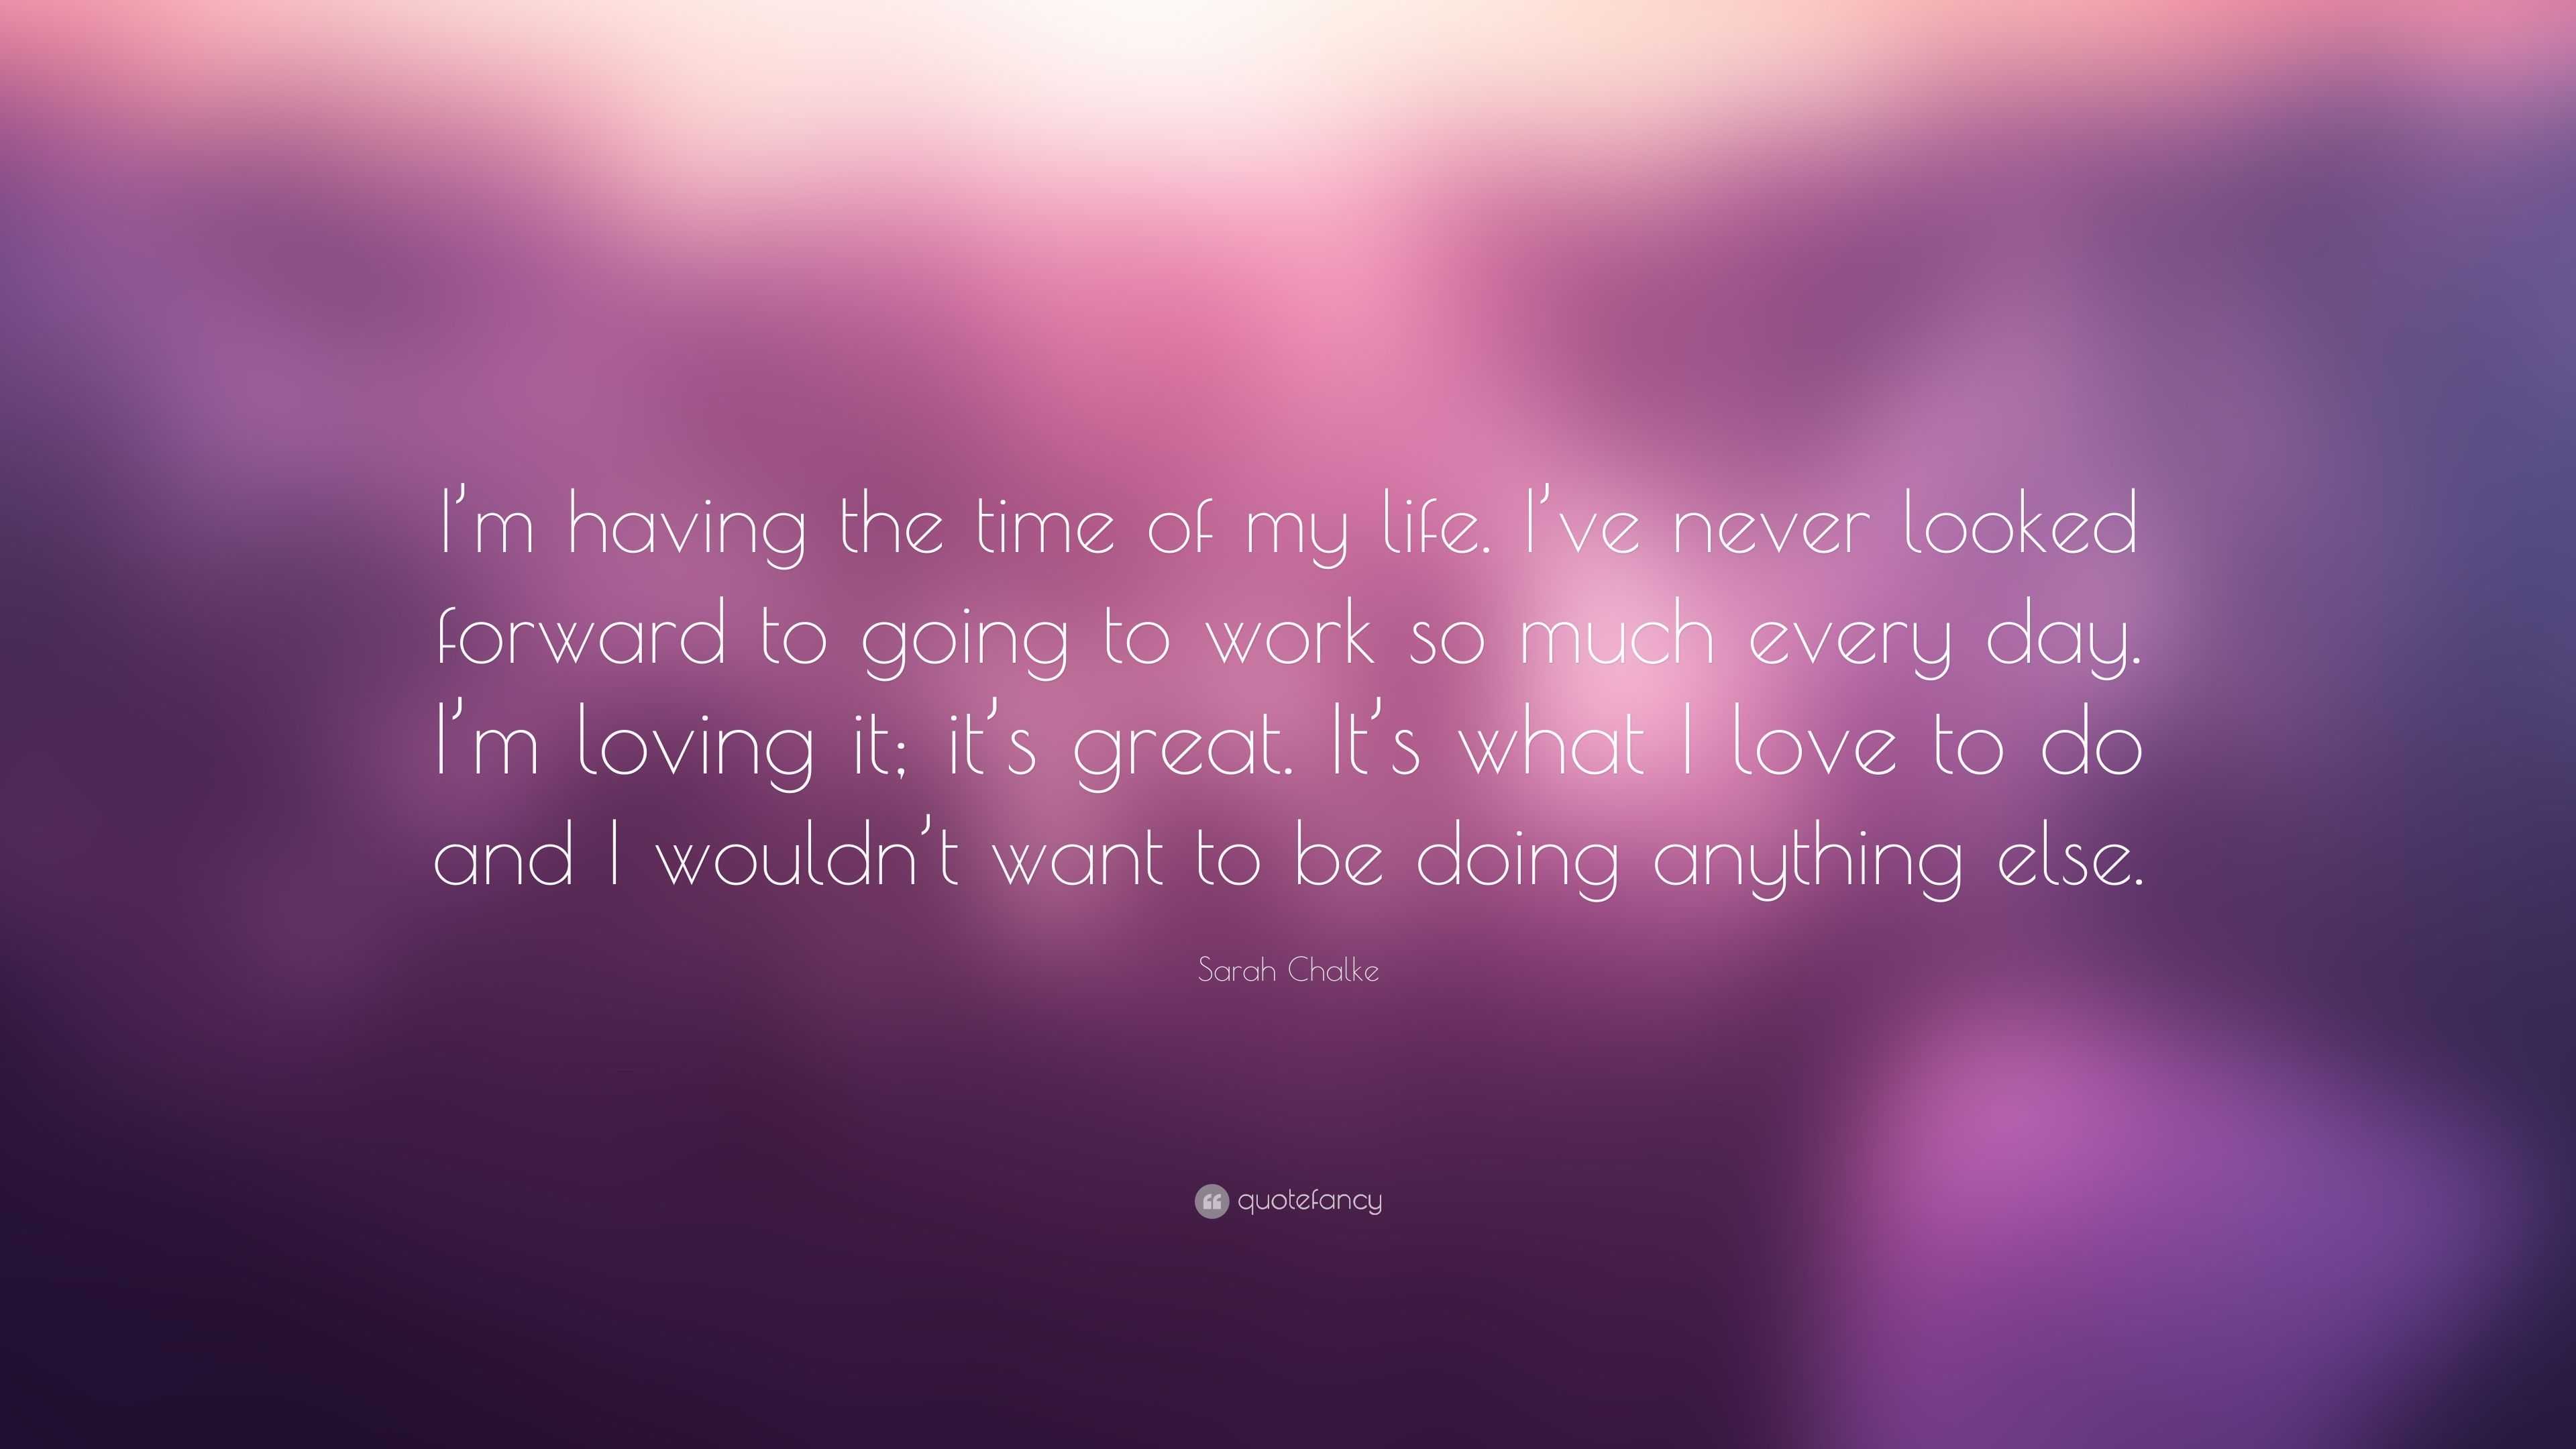 Sarah Chalke Quote “I m having the time of my life I